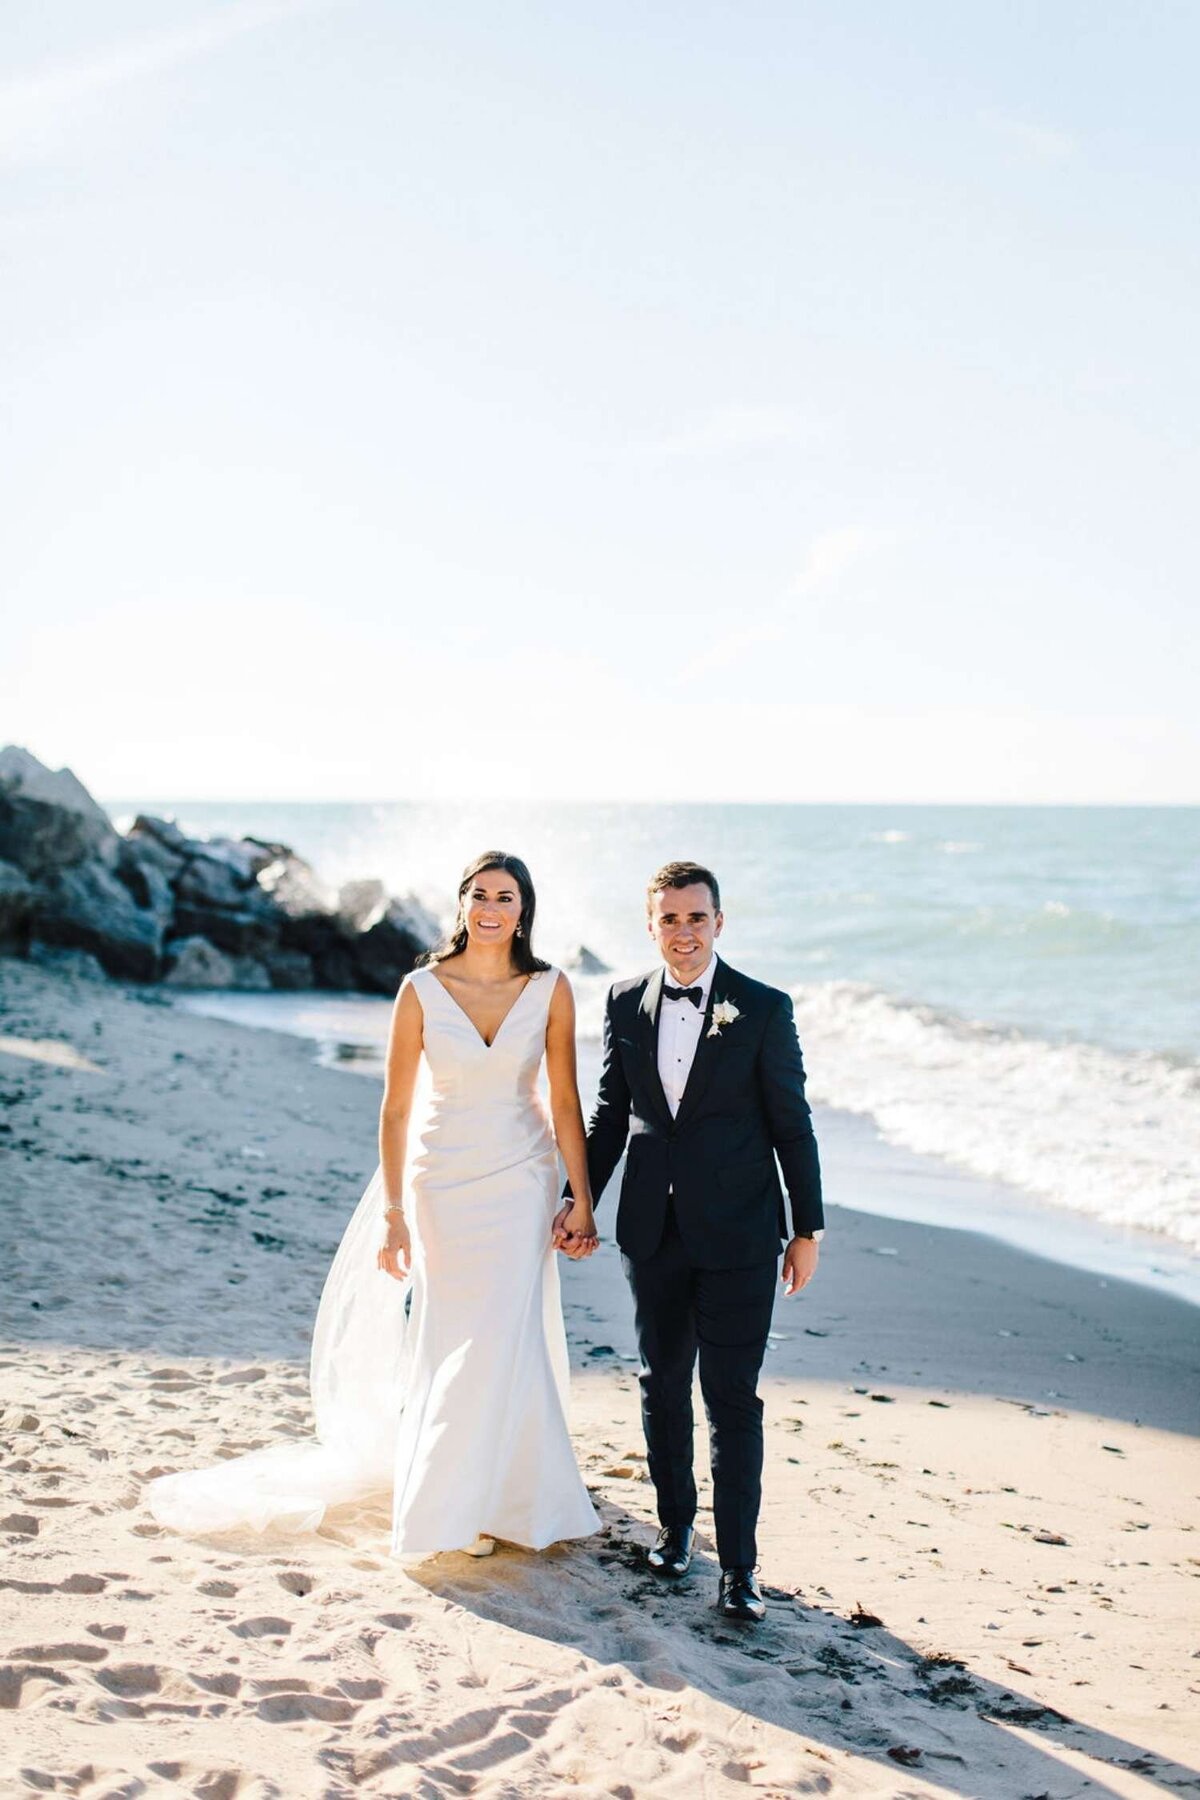 Timeless and Classic Bride and Groom take Beachfront Portraits at a Luxury Michigan Lakefront Golf Club Wedding.